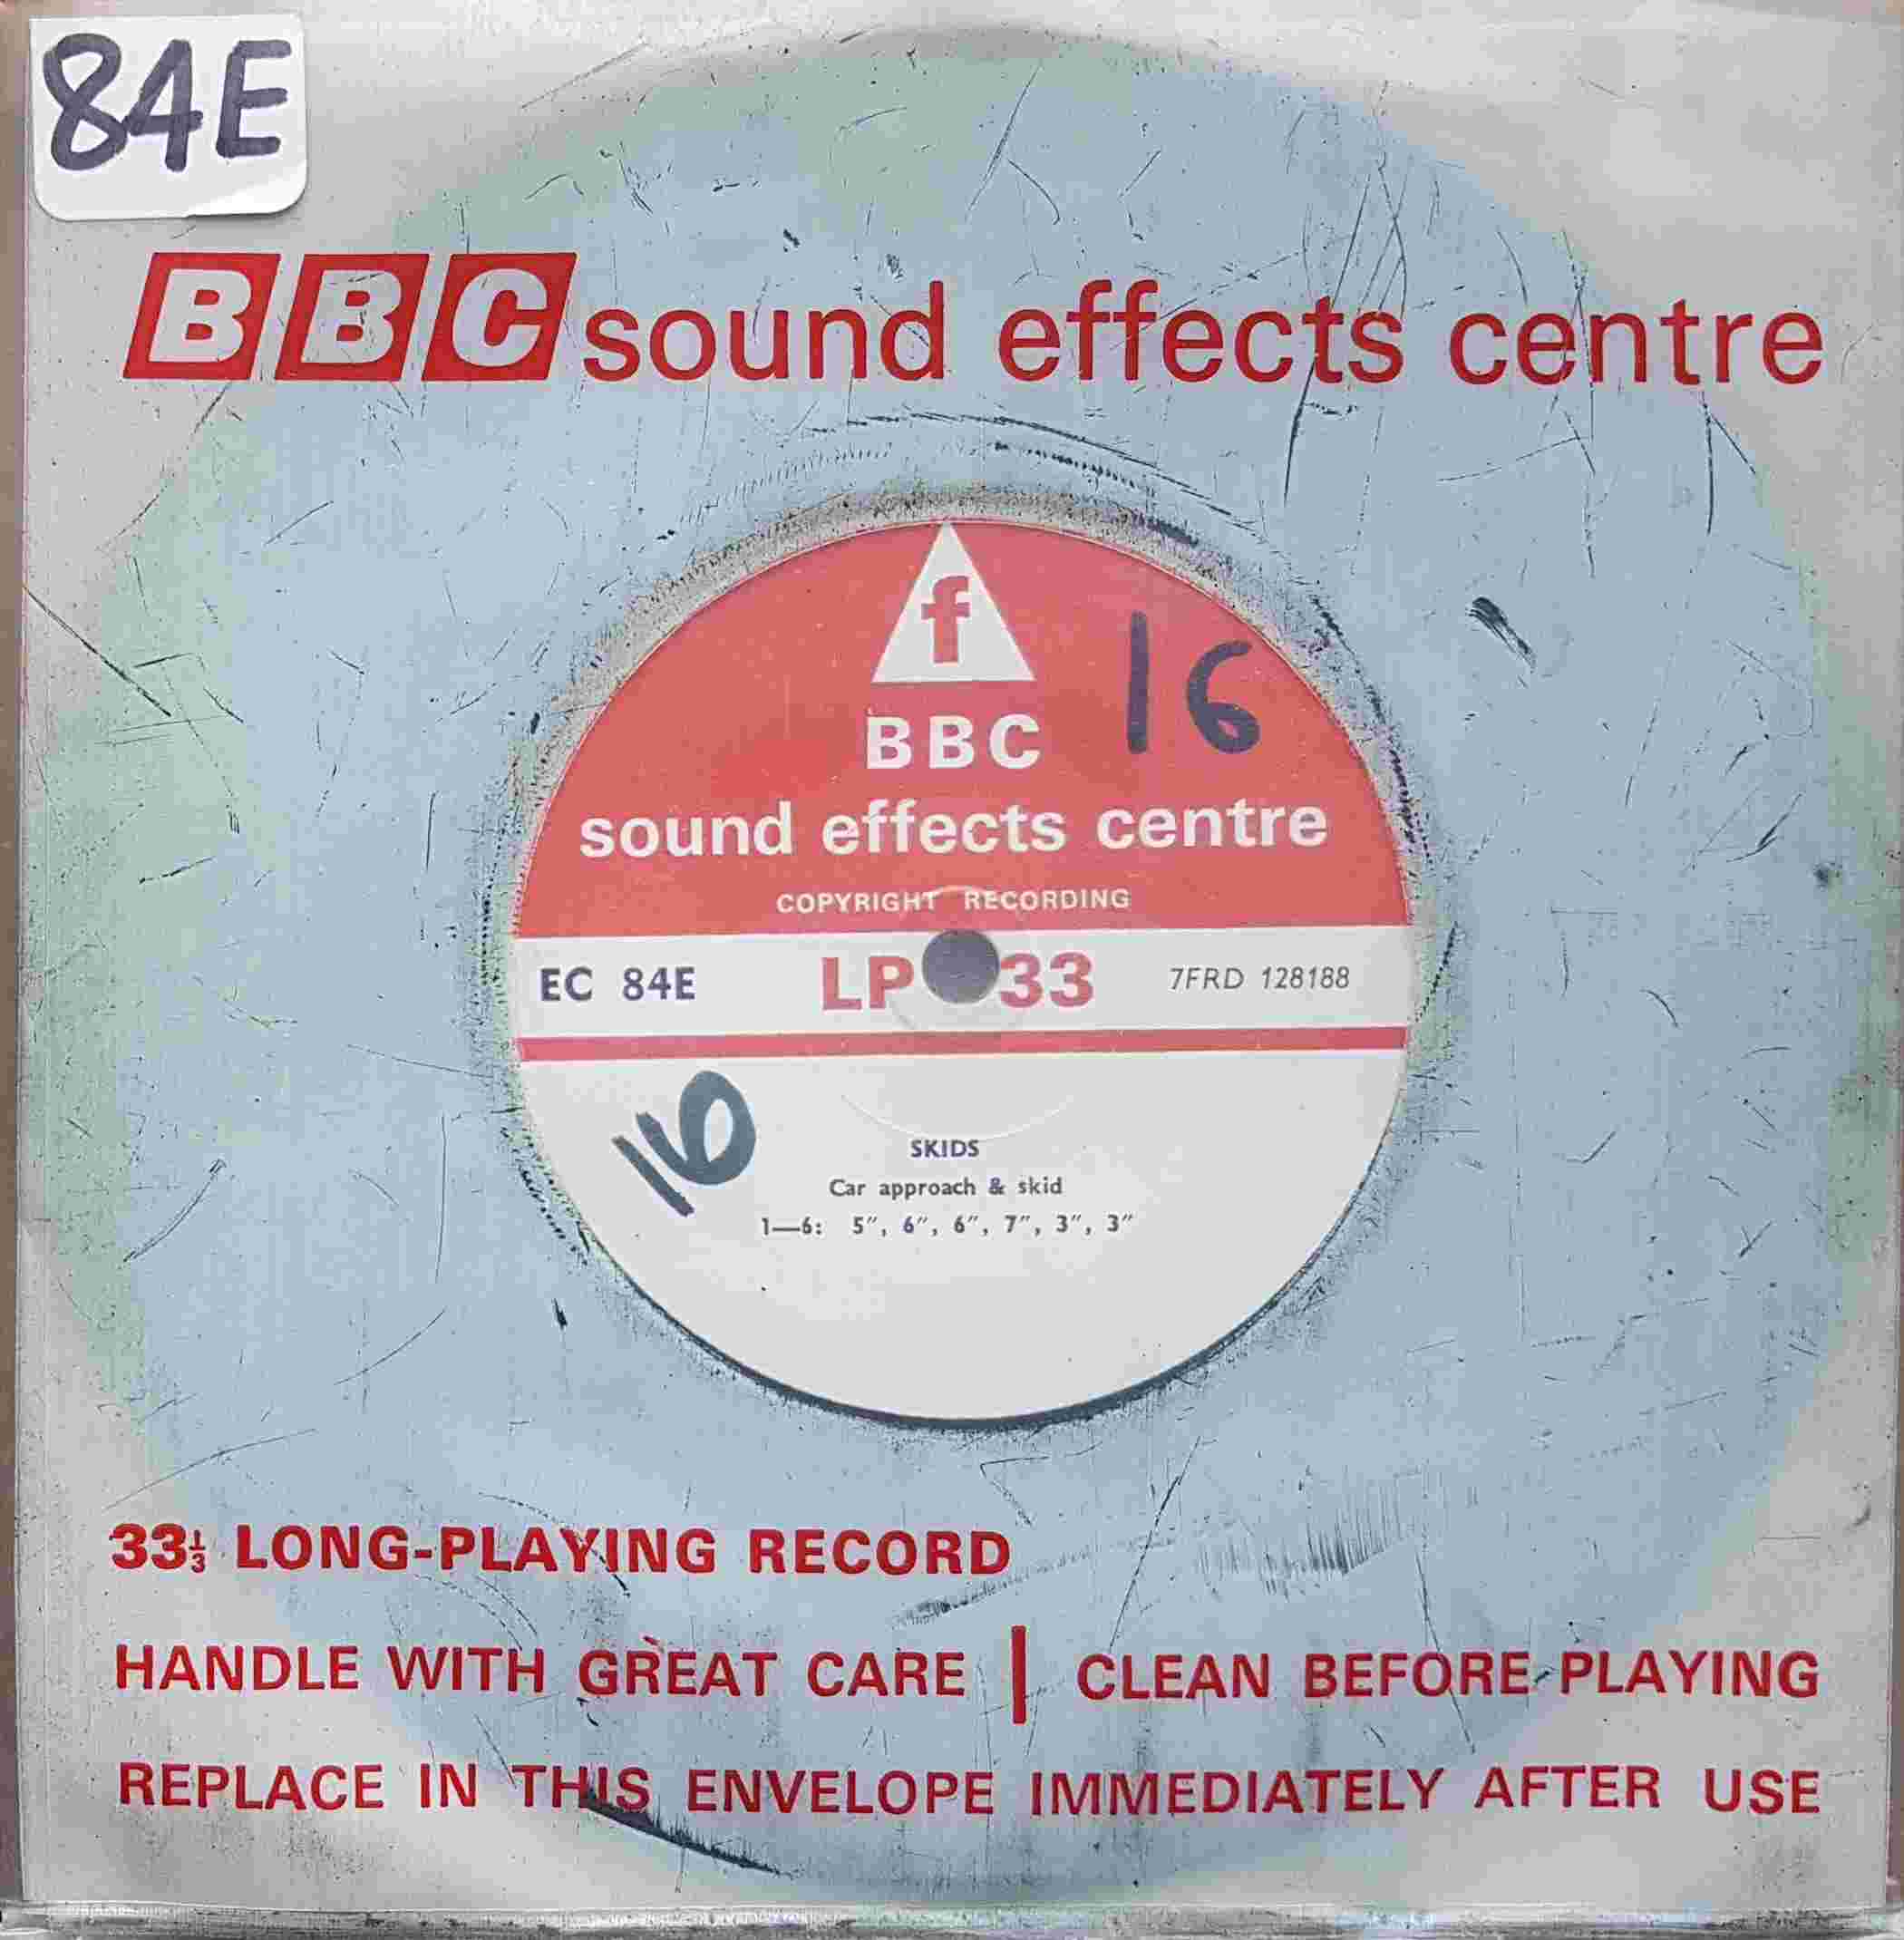 Picture of EC 84E Skids by artist Not registered from the BBC records and Tapes library